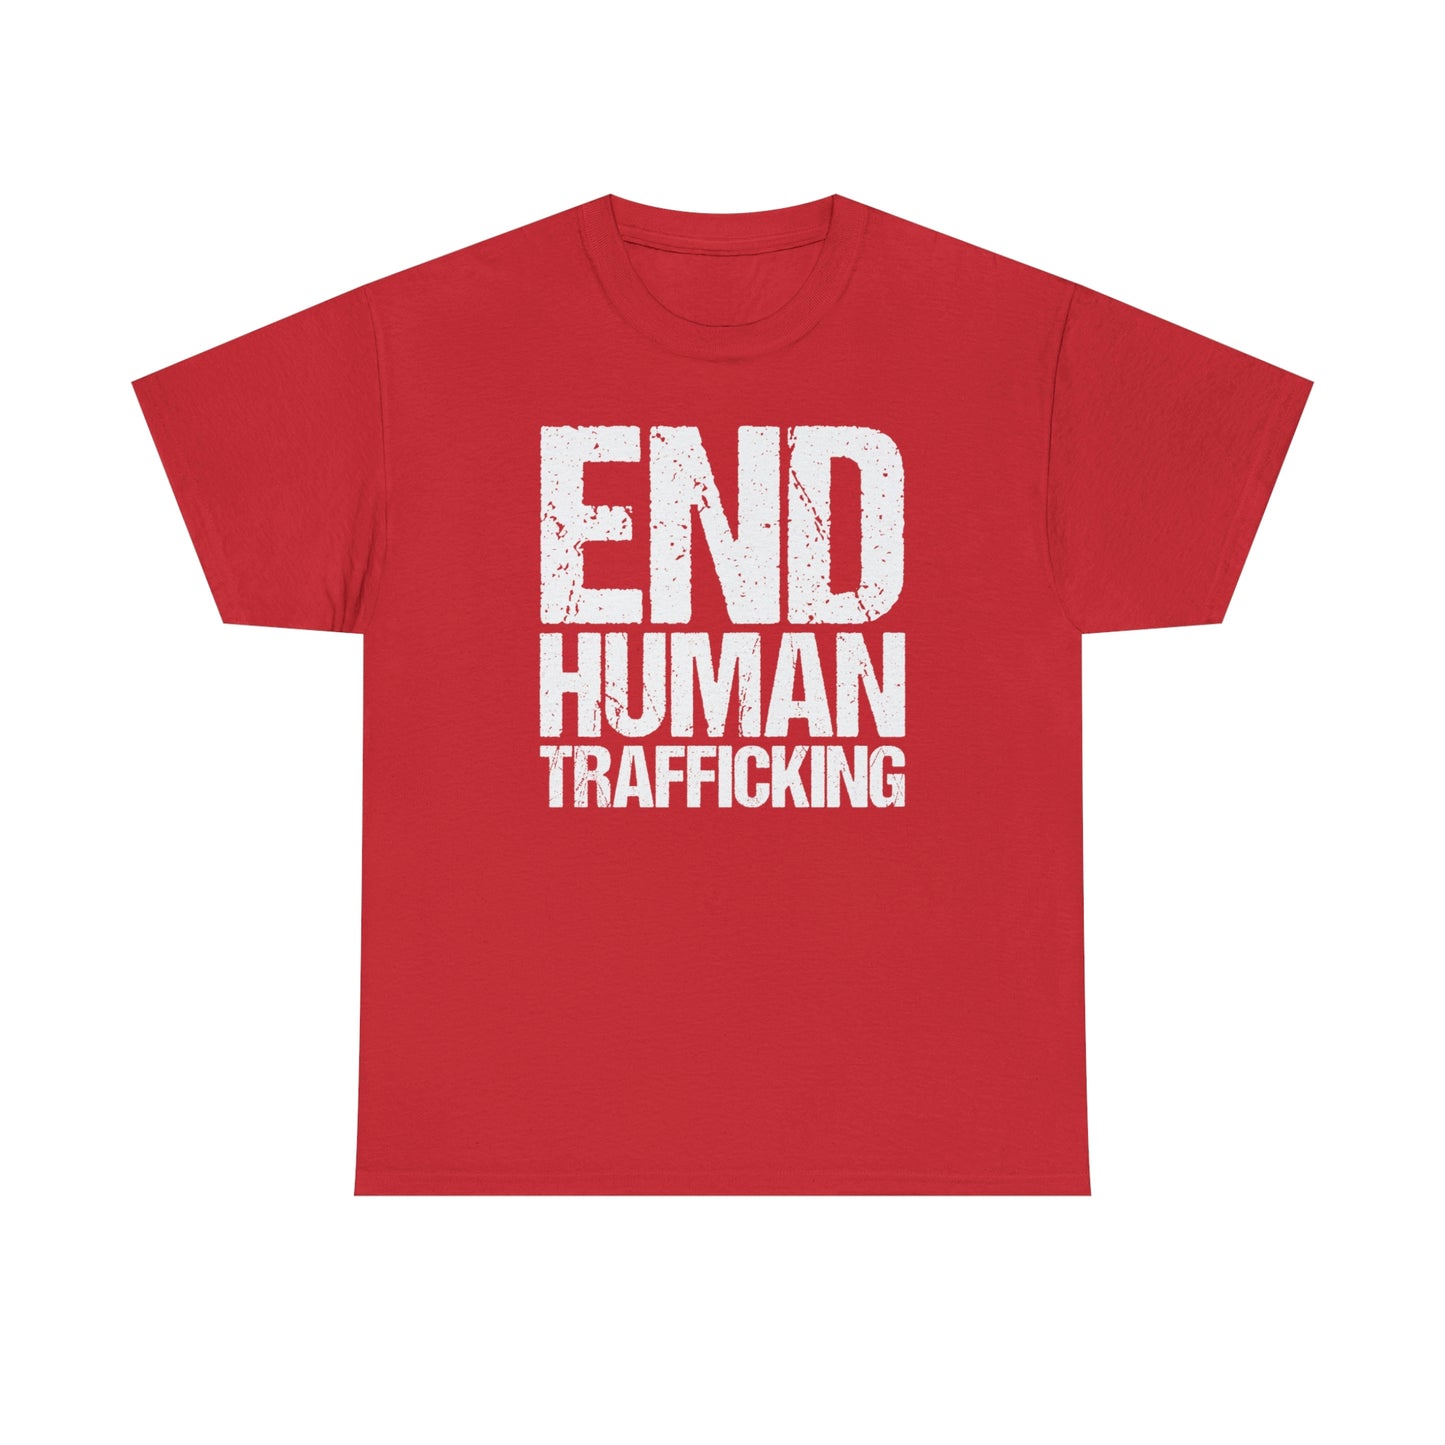 End Human Trafficking TShirt Trafficking Awareness T-Shirt For Conservative Shirt Save The Children Awareness T Shirt For A Cause Help Shirt